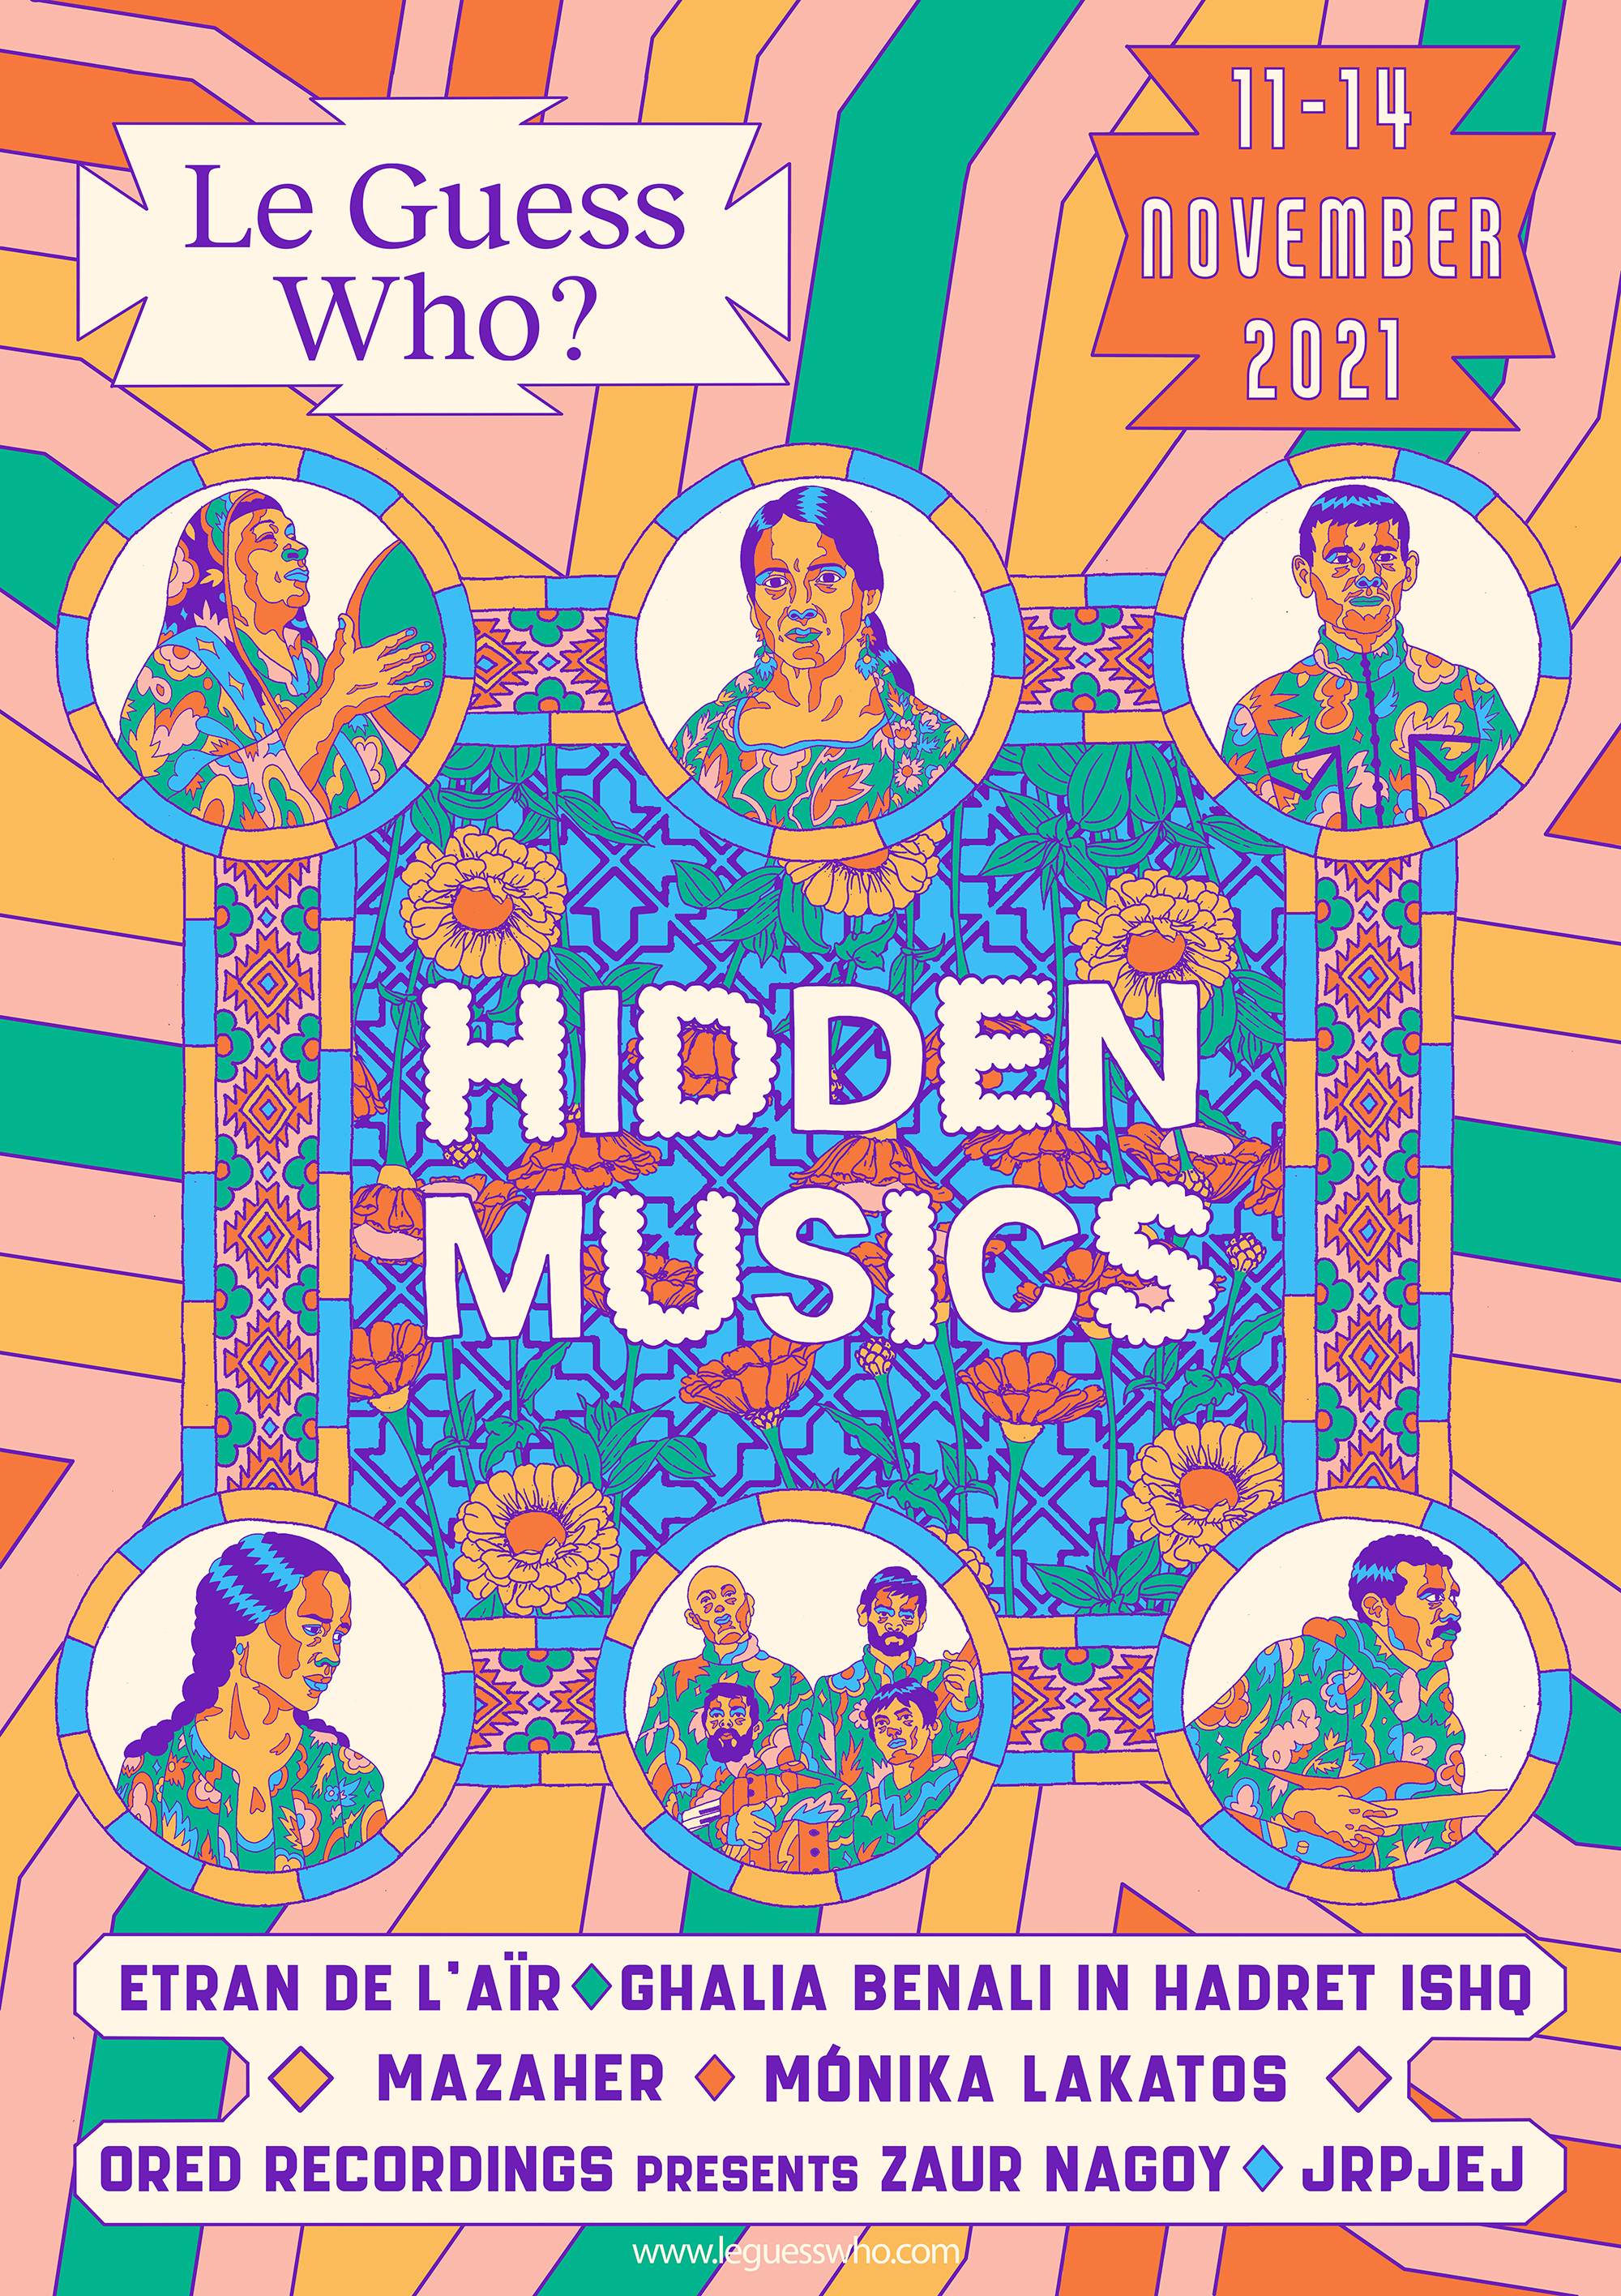 Le Guess Who? presents the second edition of concert series Hidden Musics at 2021 festival